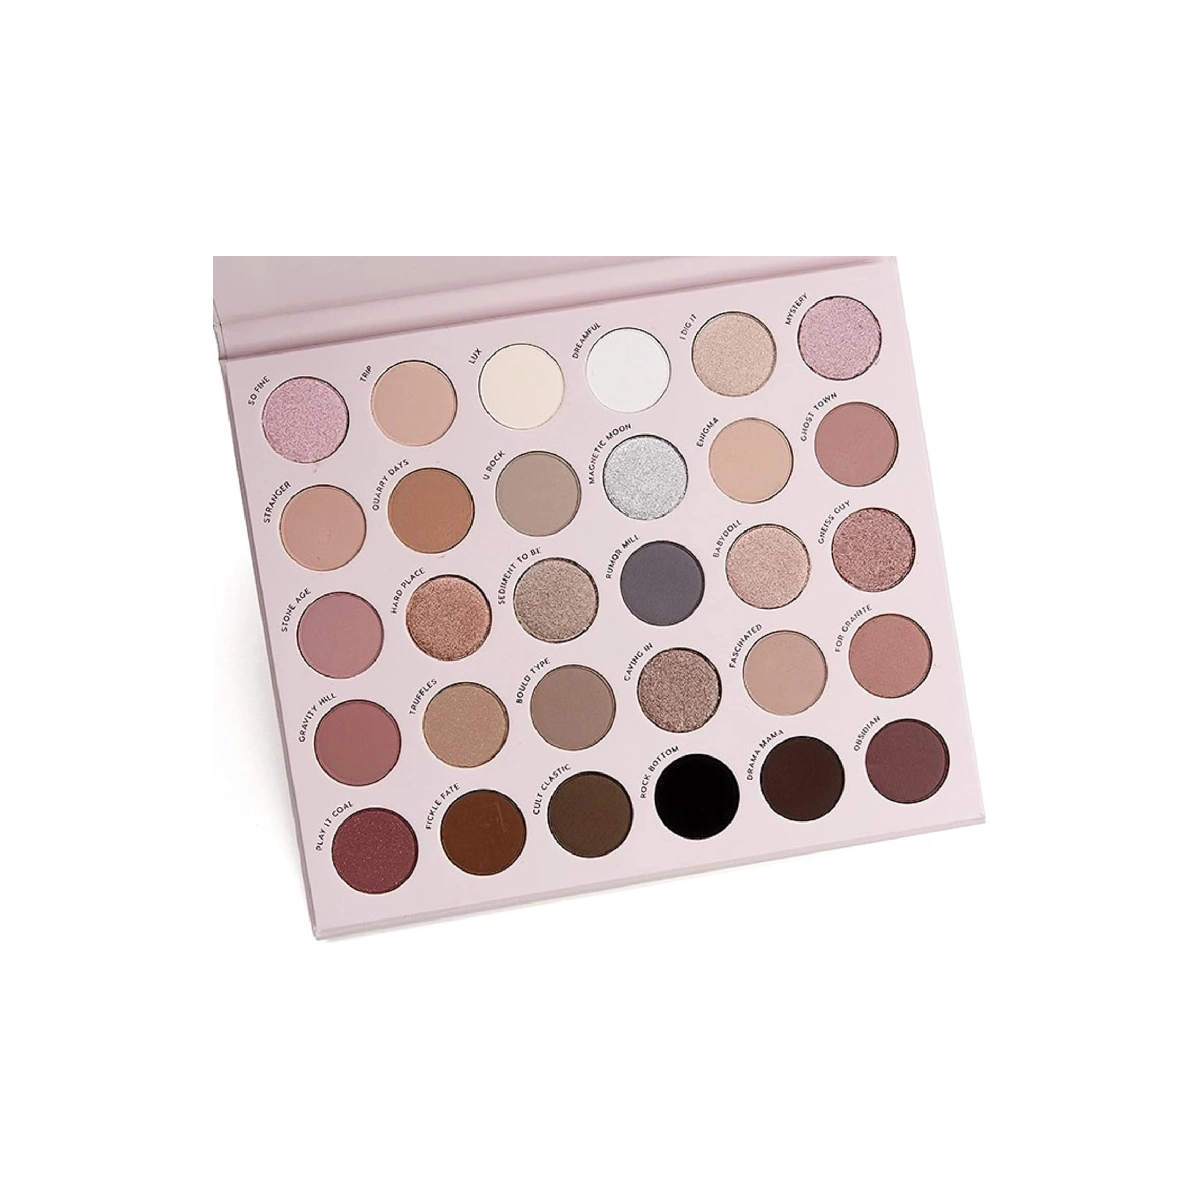 Colourpop Stone Cold Fox palette - assortment of eyeshadows against a white background